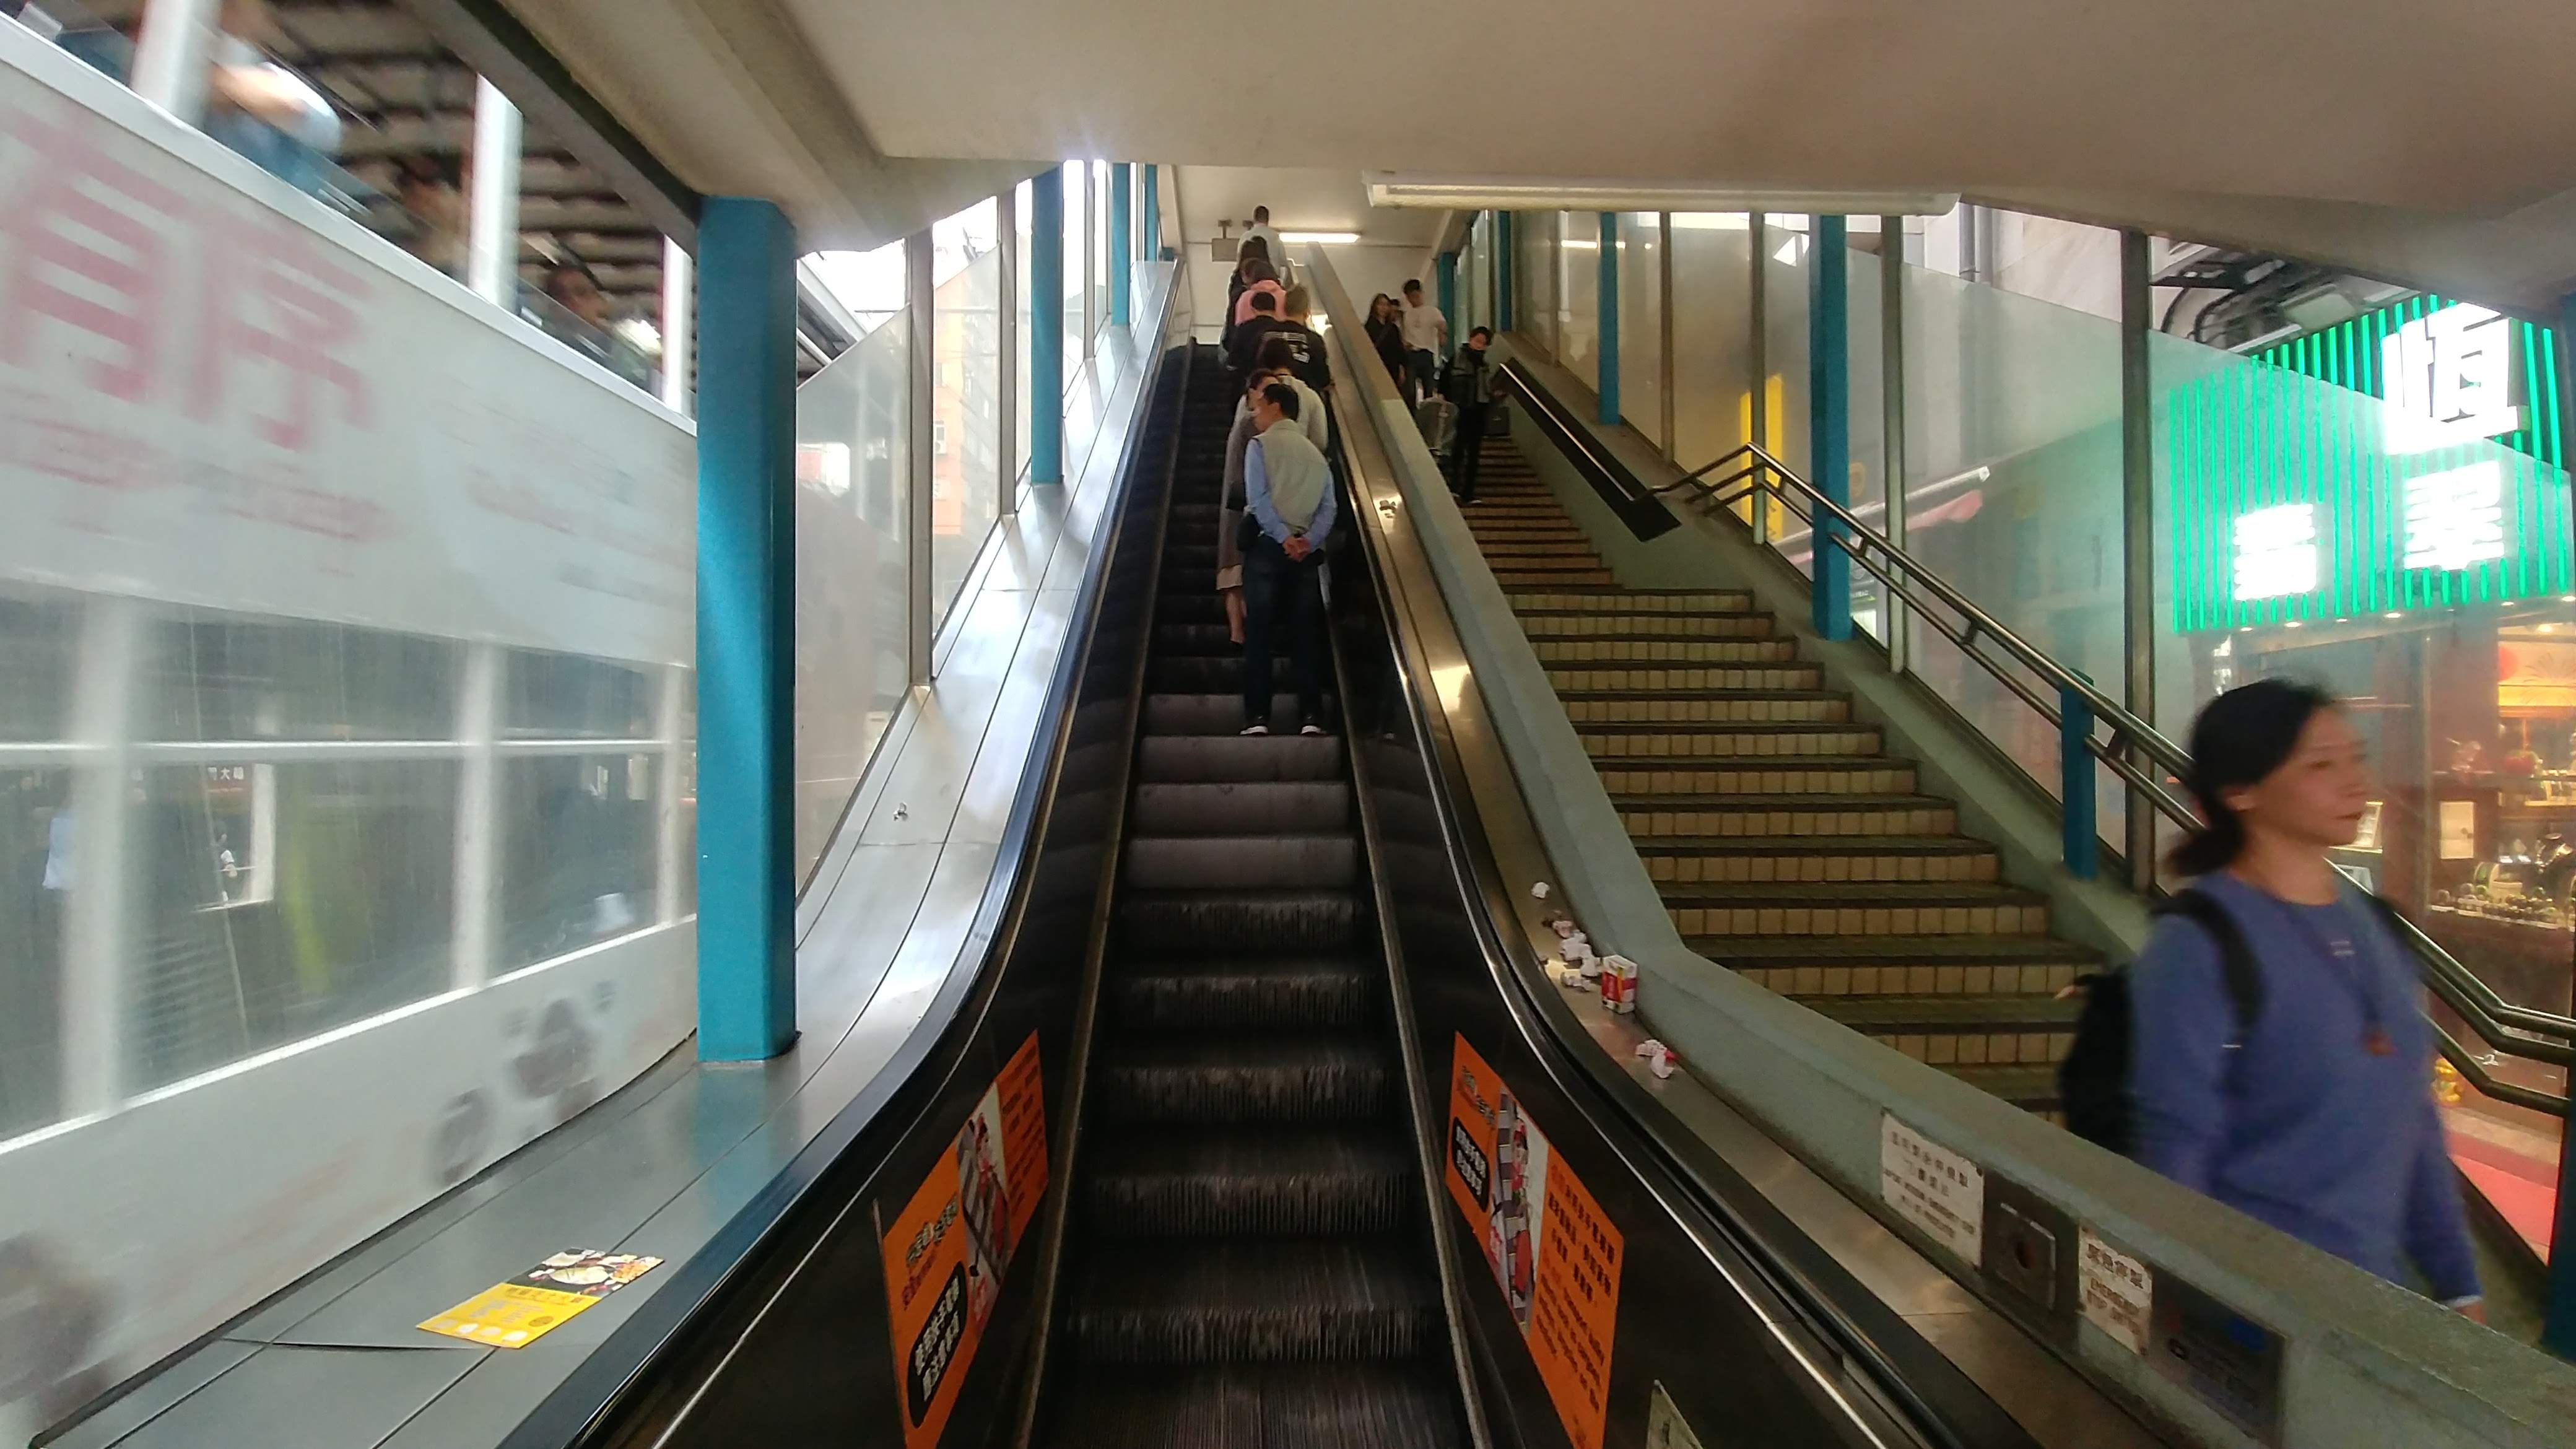 People only stand on the right of the escalator